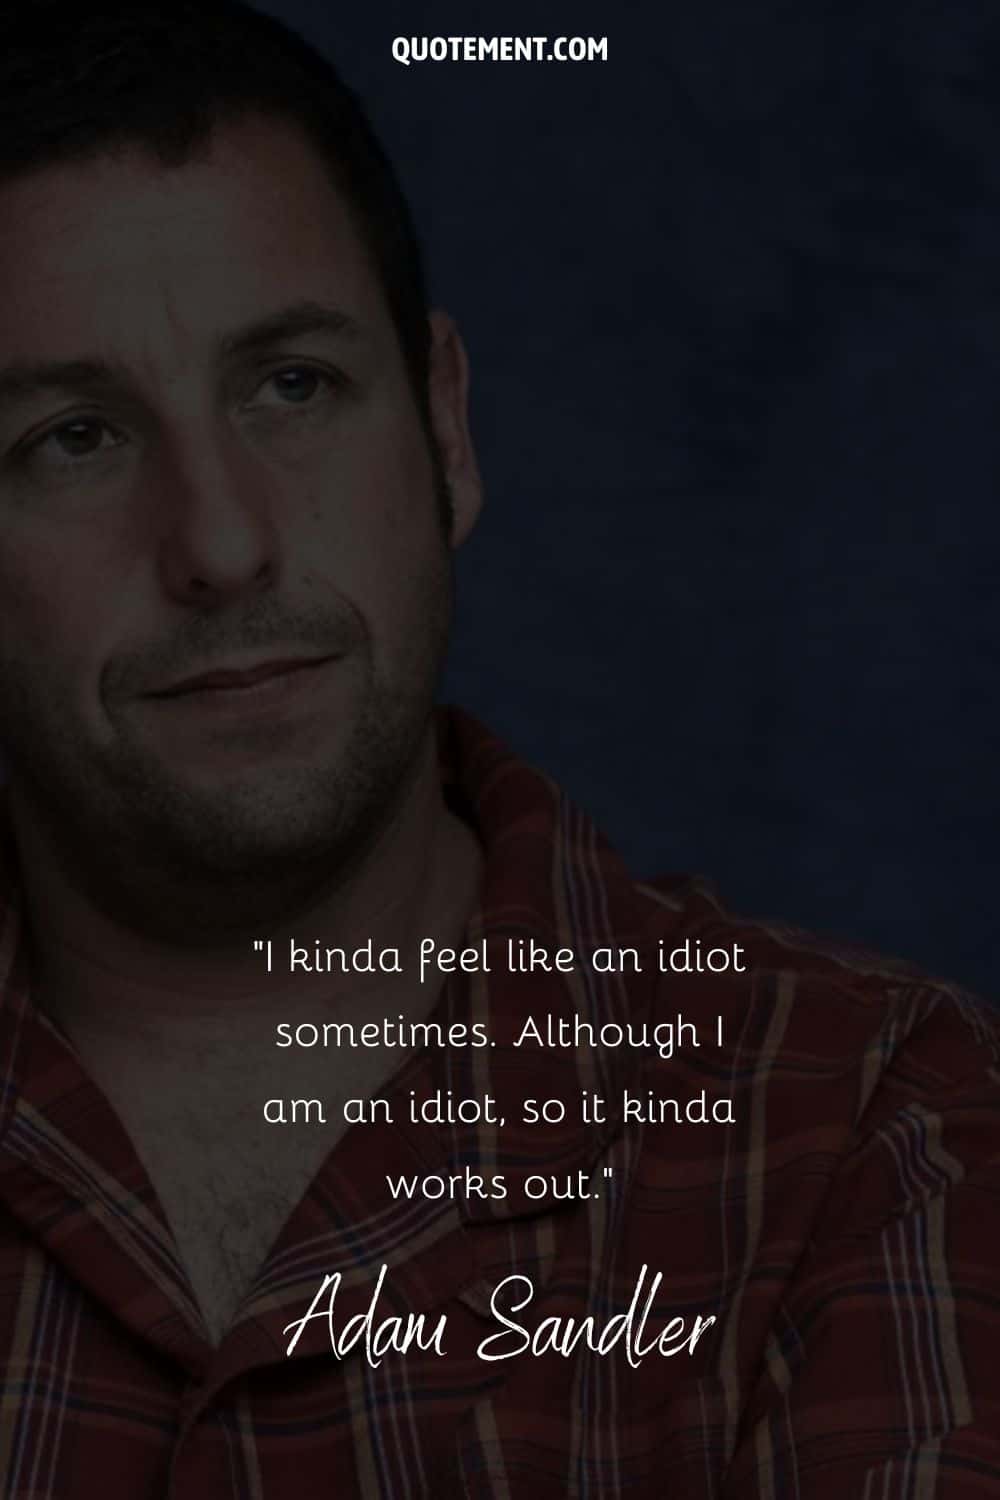 funny quote by Adam Sandler on being an idiot